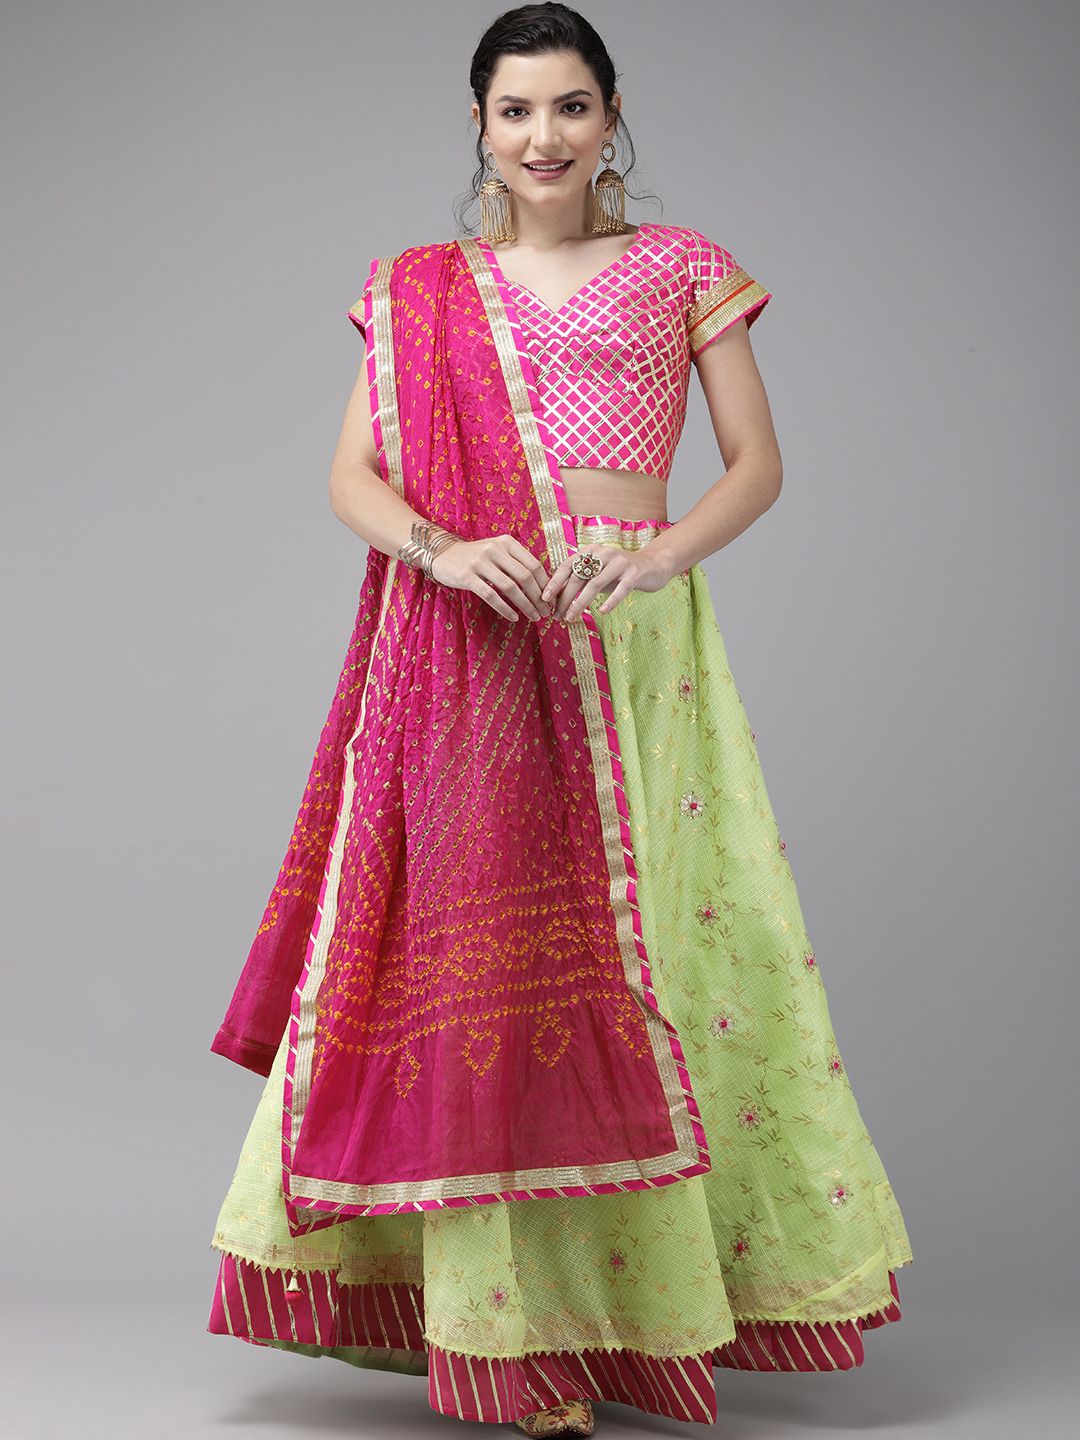 Geroo Jaipur Handcrafted Lime Green Stitched Kota Silk Sustainable Lehenga With Bandhani Dupatta Price in India